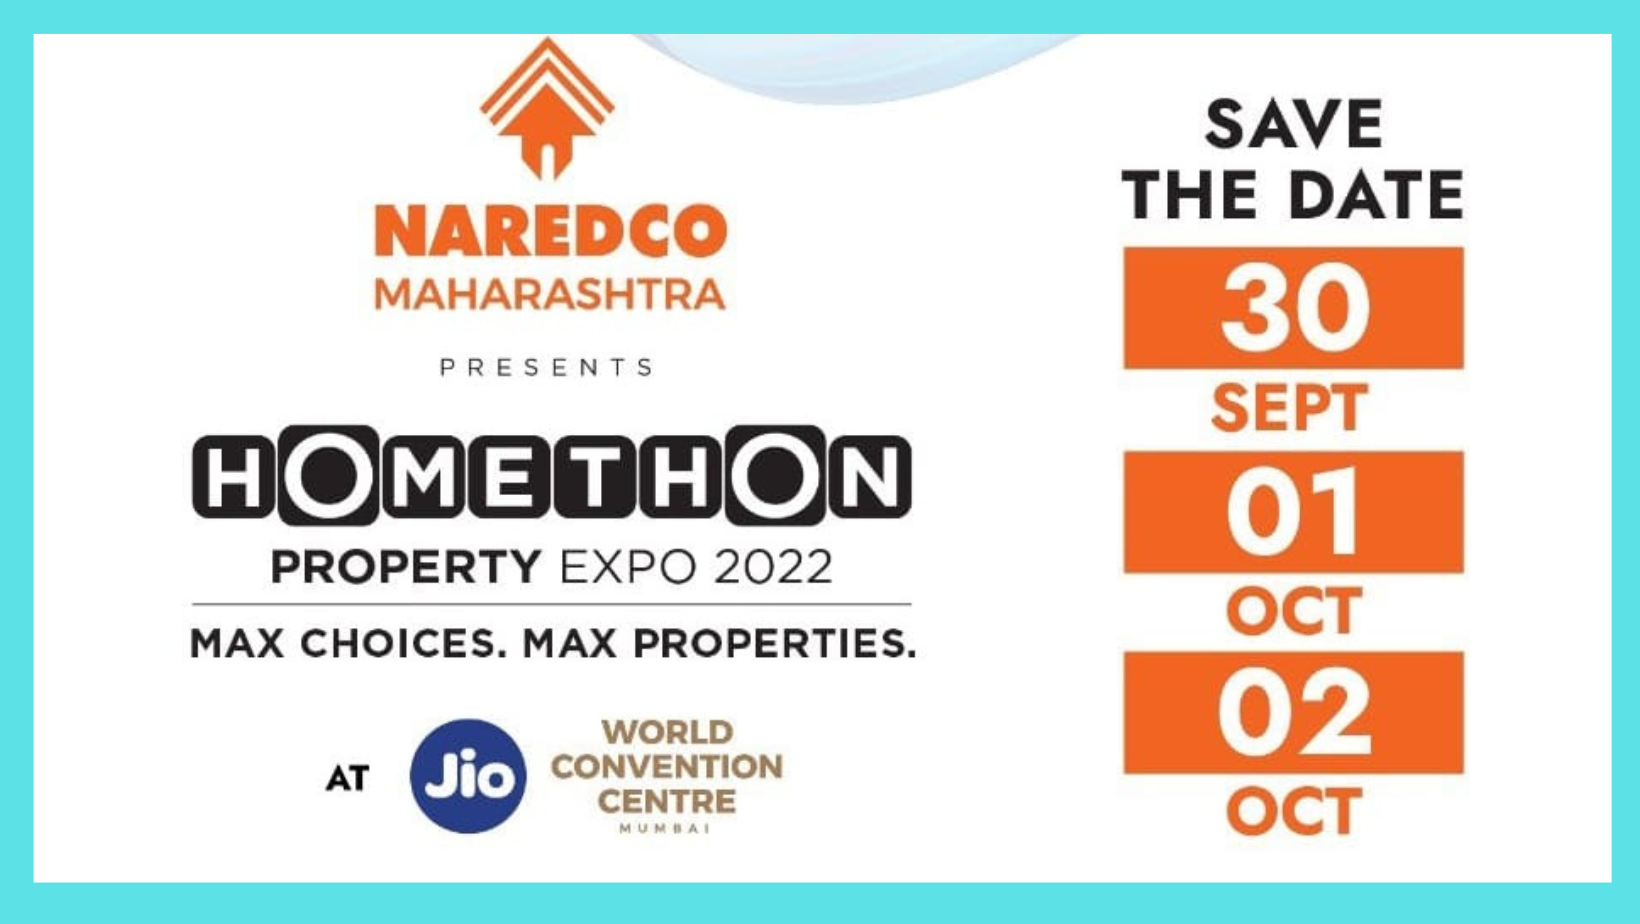 NAREDCO Maharashtra is all set to host India’s real estate property expo at the Jio Convention Center.